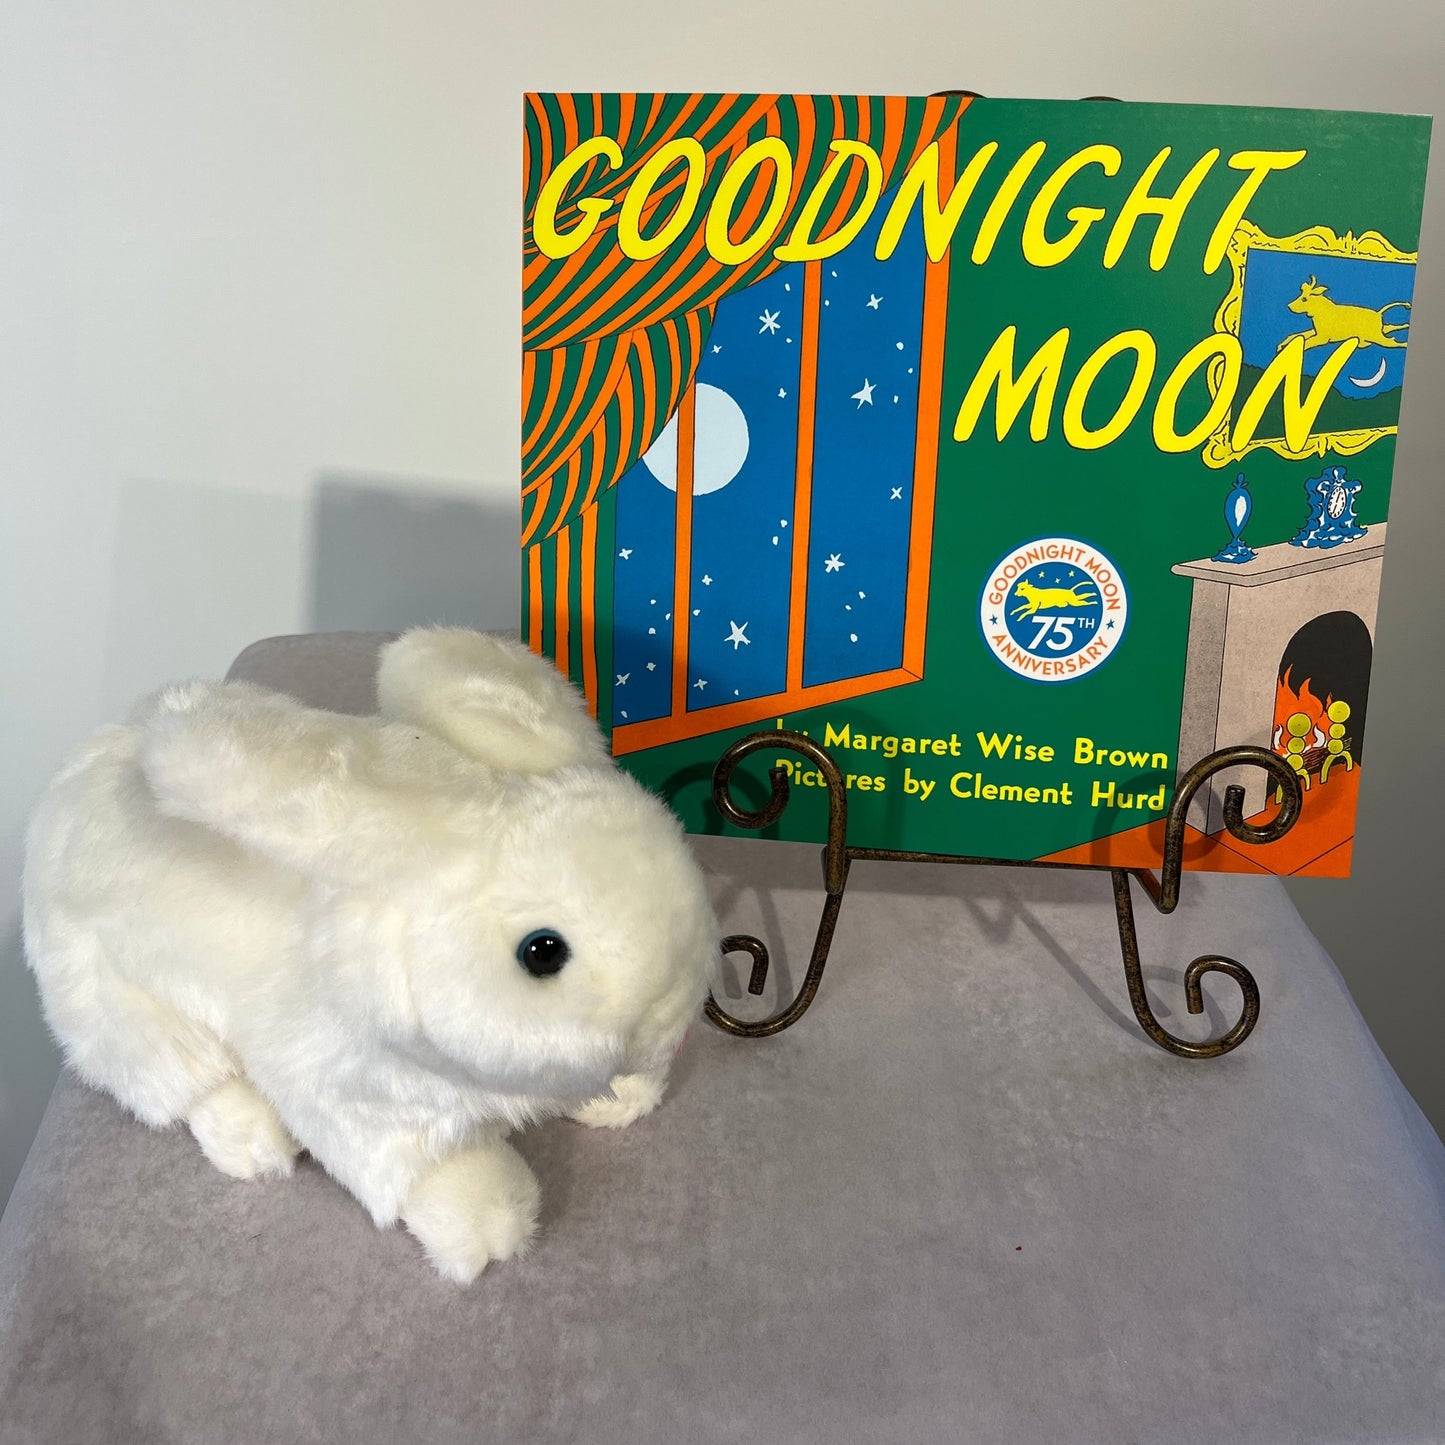 Goodnight Moon softcover book and white plush stuffed rabbit